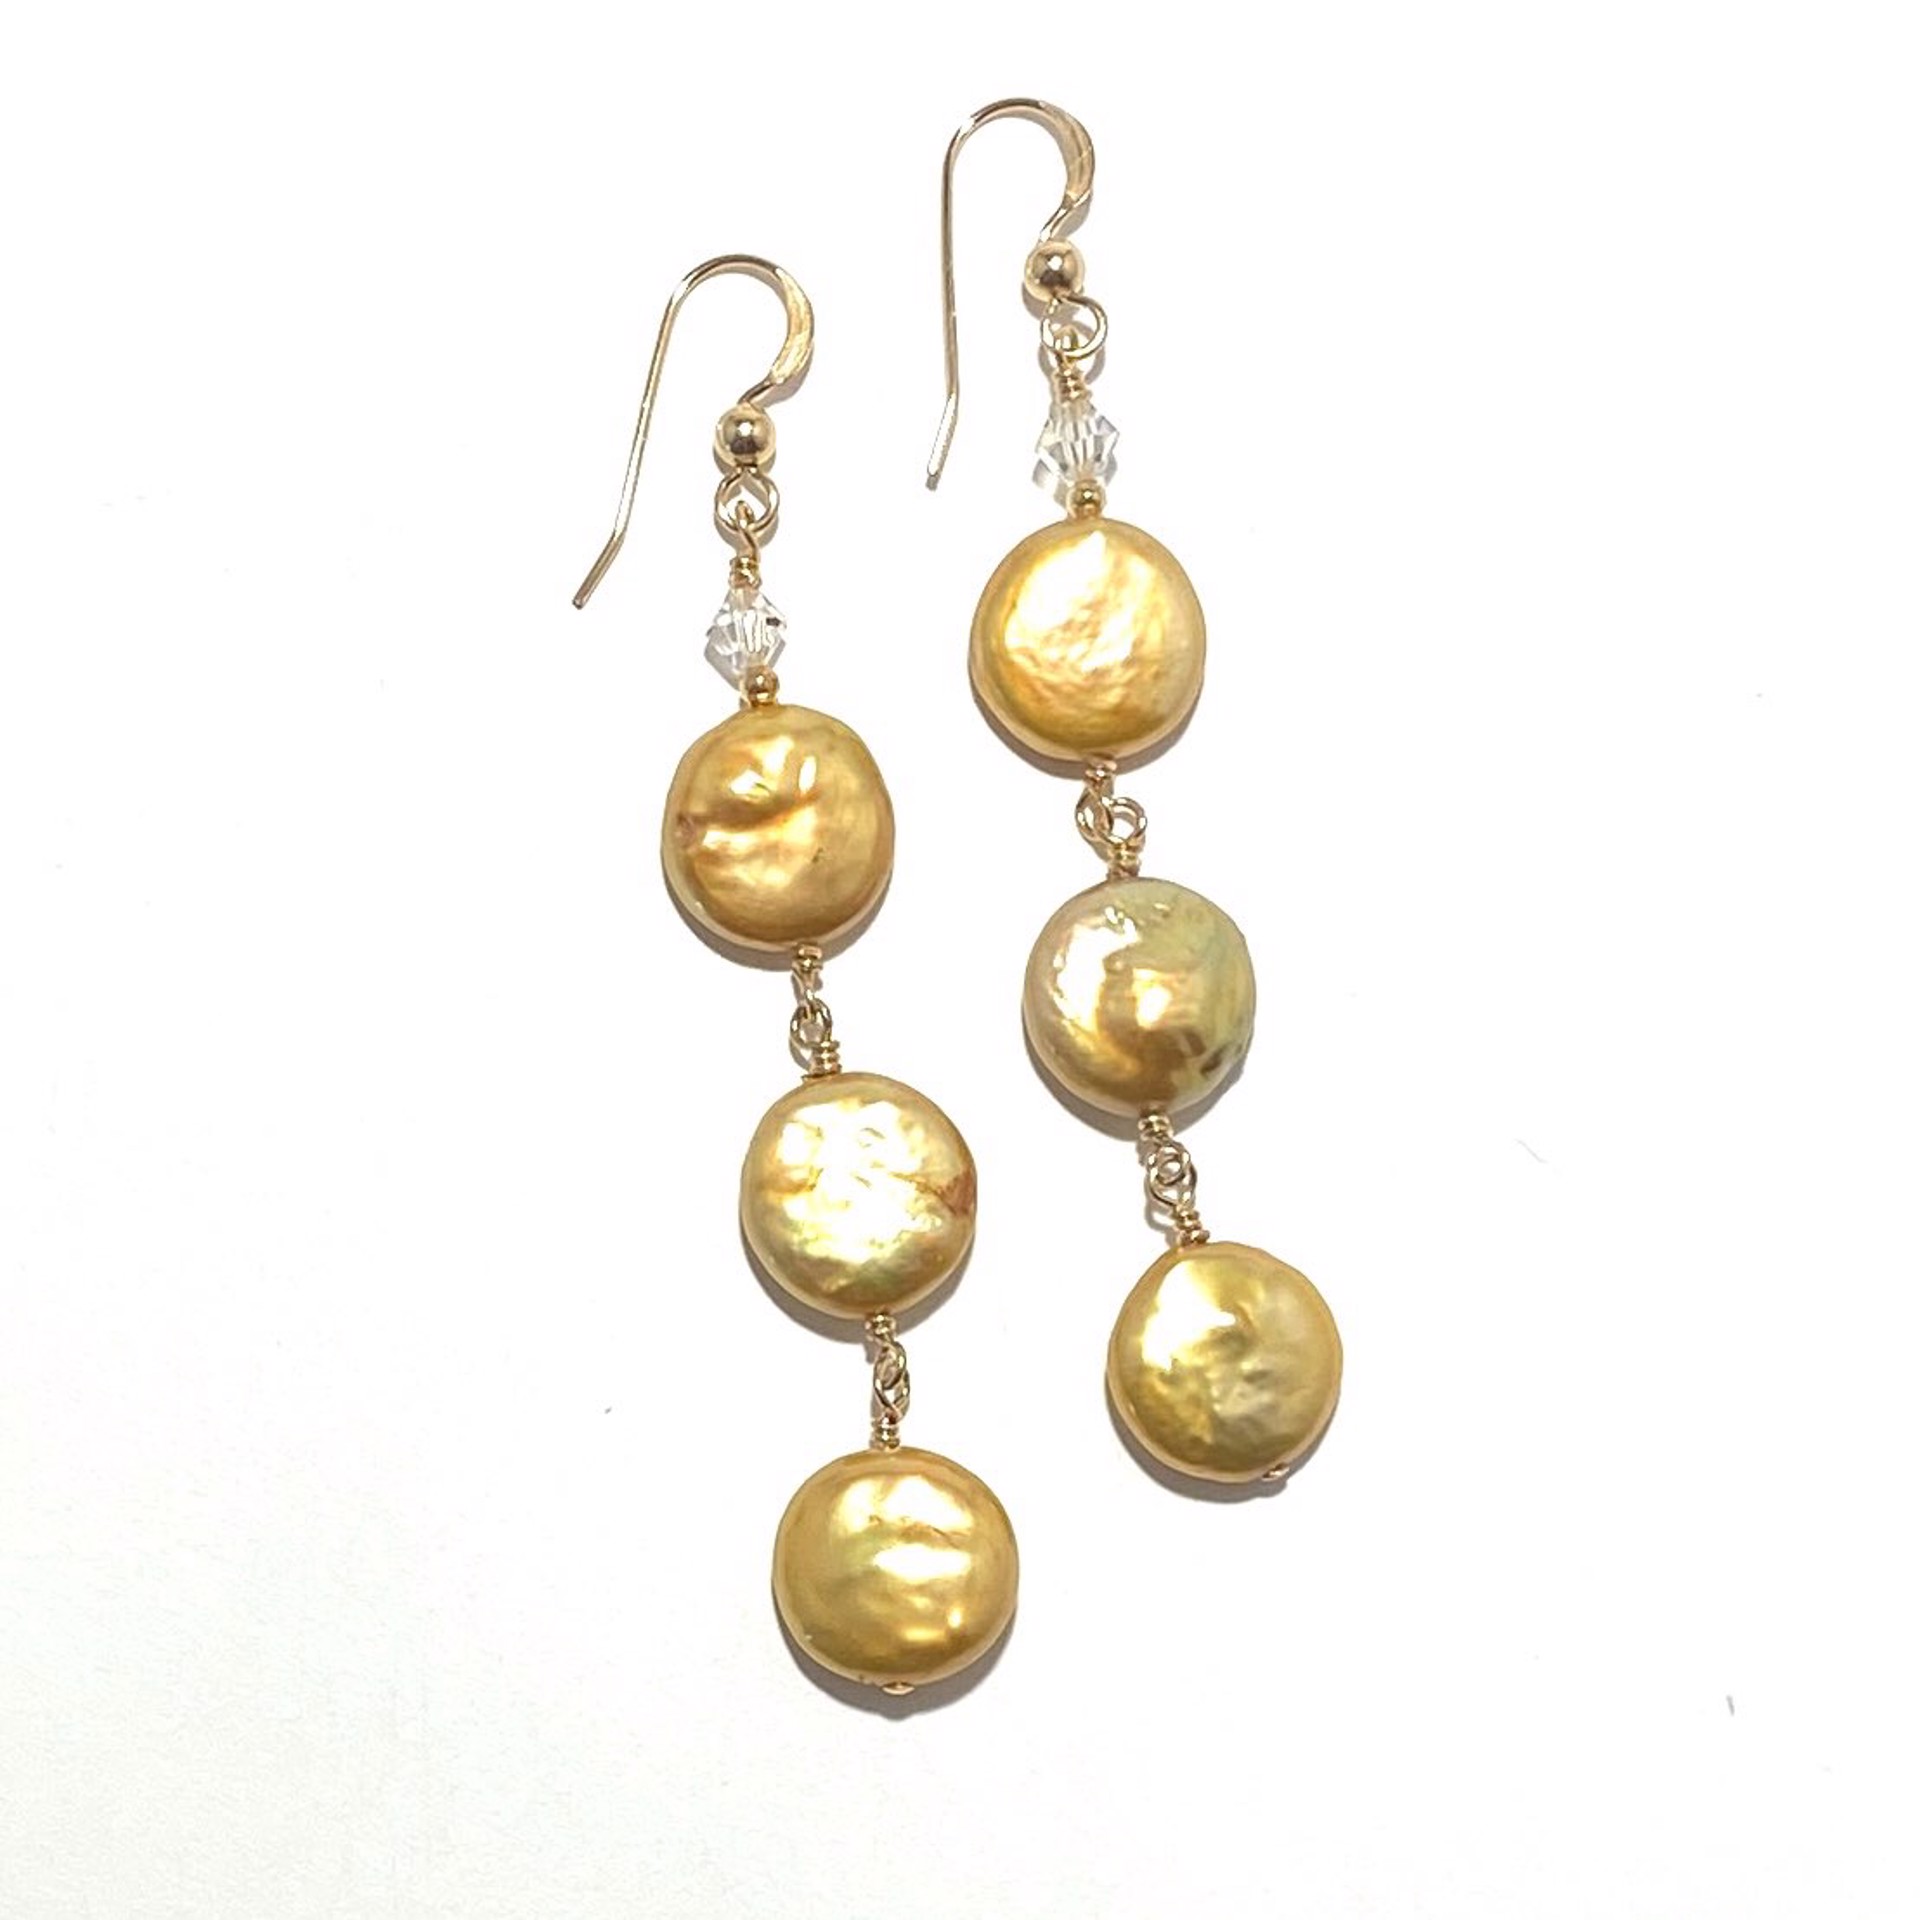 Three Gold Coin Pearl GF Earrings LR23-36 by Legare Riano